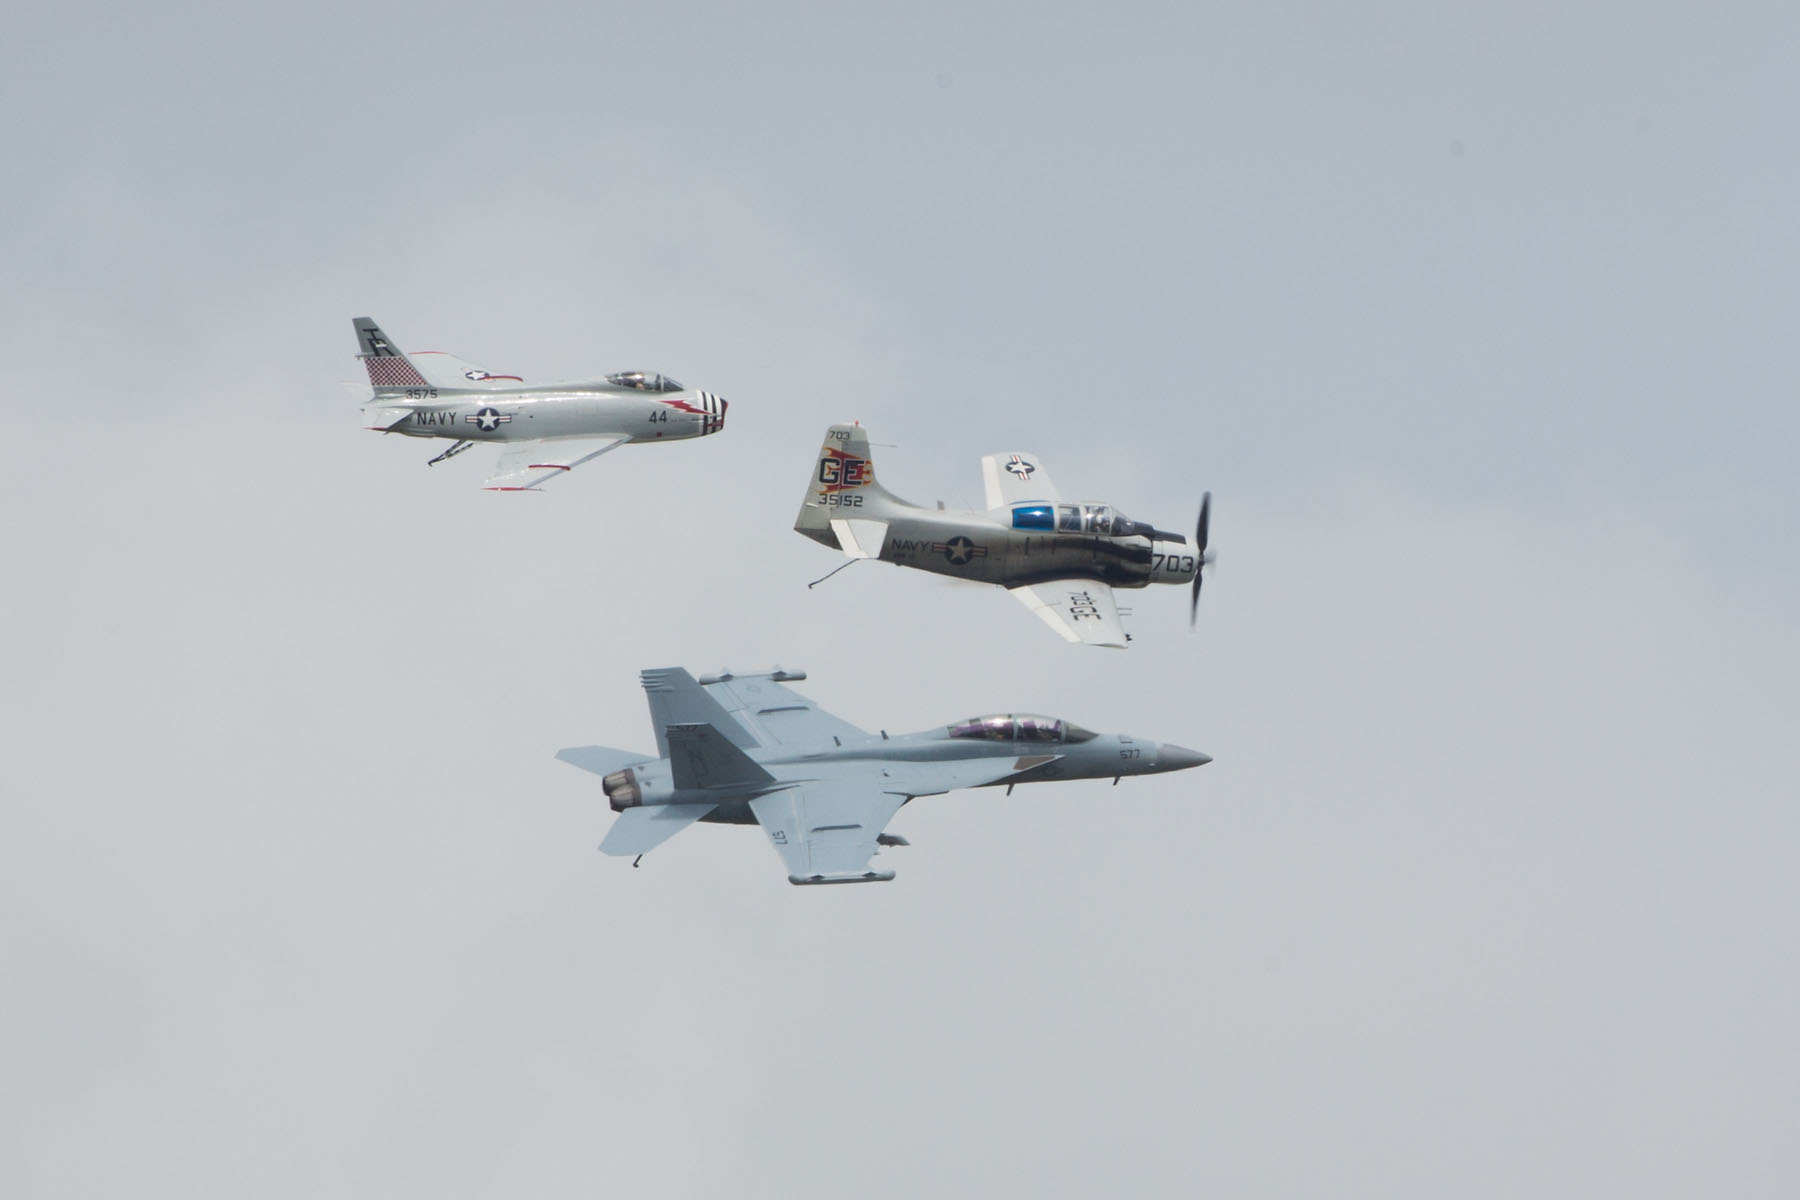 Heritage flight, Sioux Falls Air Show.  The flight featured Navy planes (from top) FJ-4B Fury, AD-4 Skyraider, and F/A-18 Hornet.  Click for next photo.